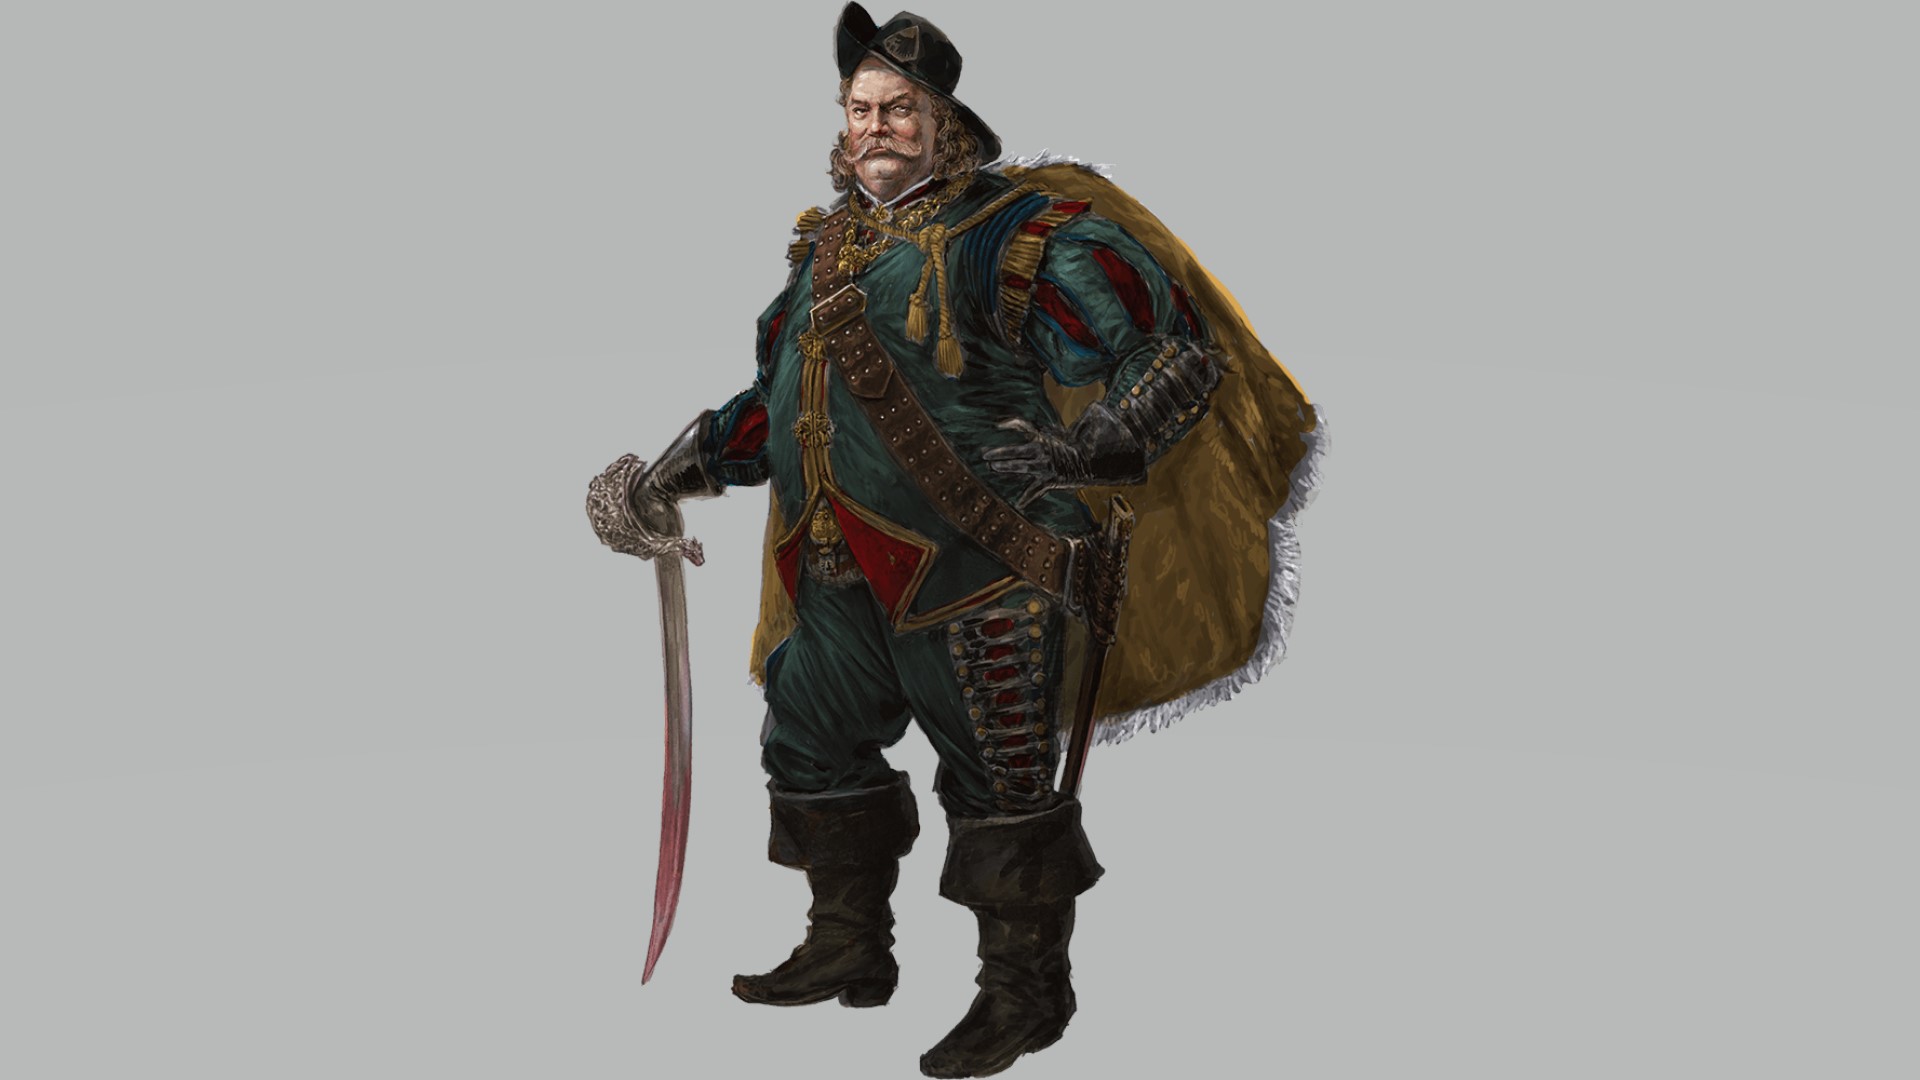 DnD Rogue 5e - Wizards of the Coast artwork showing a human male rogue swashbuckler with a sabre and a great big bushy beard